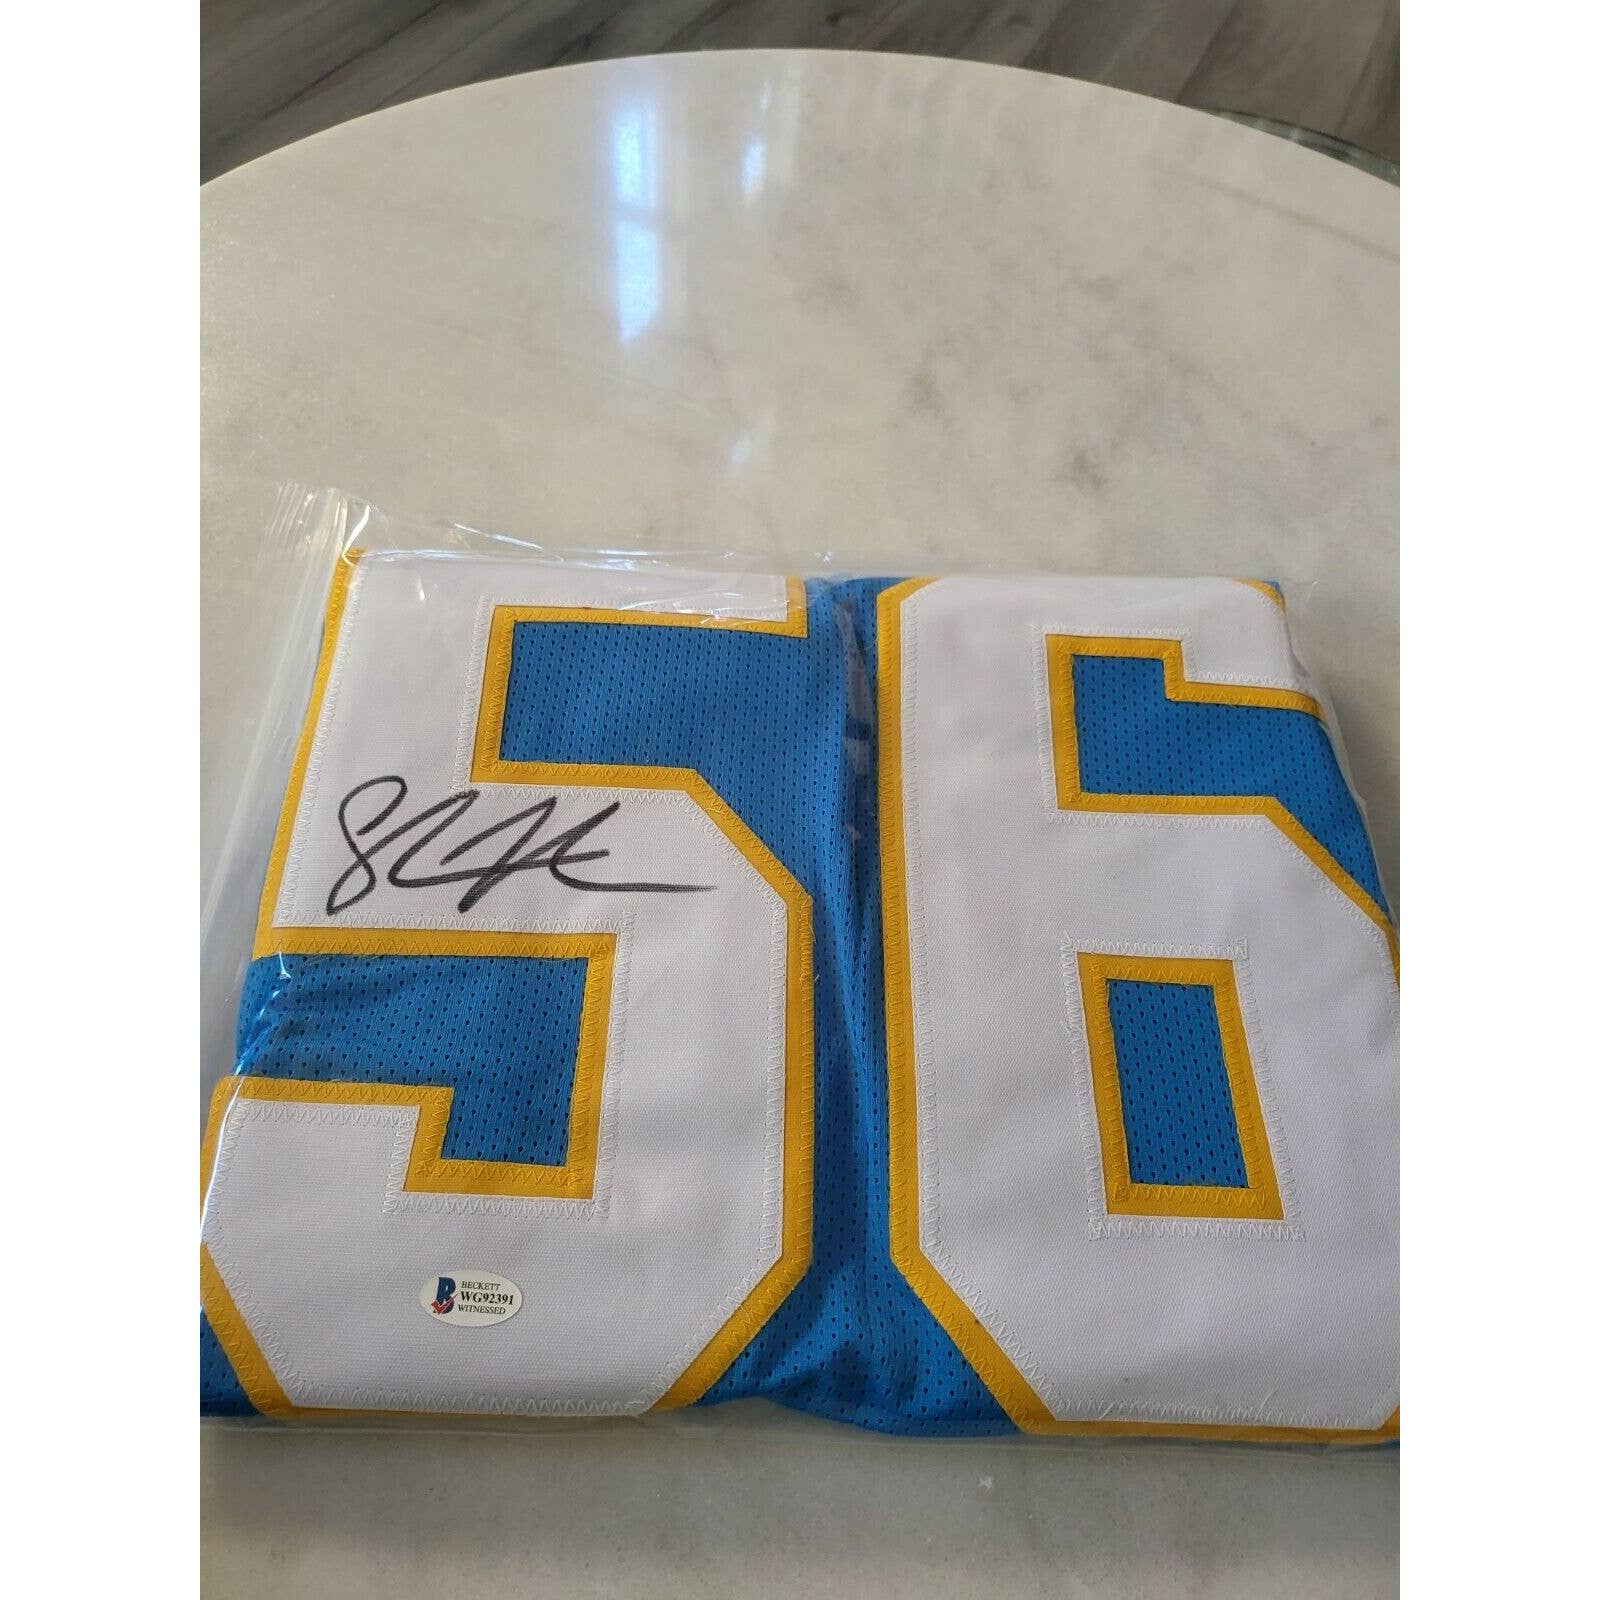 Shawne Merriman Autographed/Signed Jersey COA San Diego Chargers Los Angeles LA - TreasuresEvolved